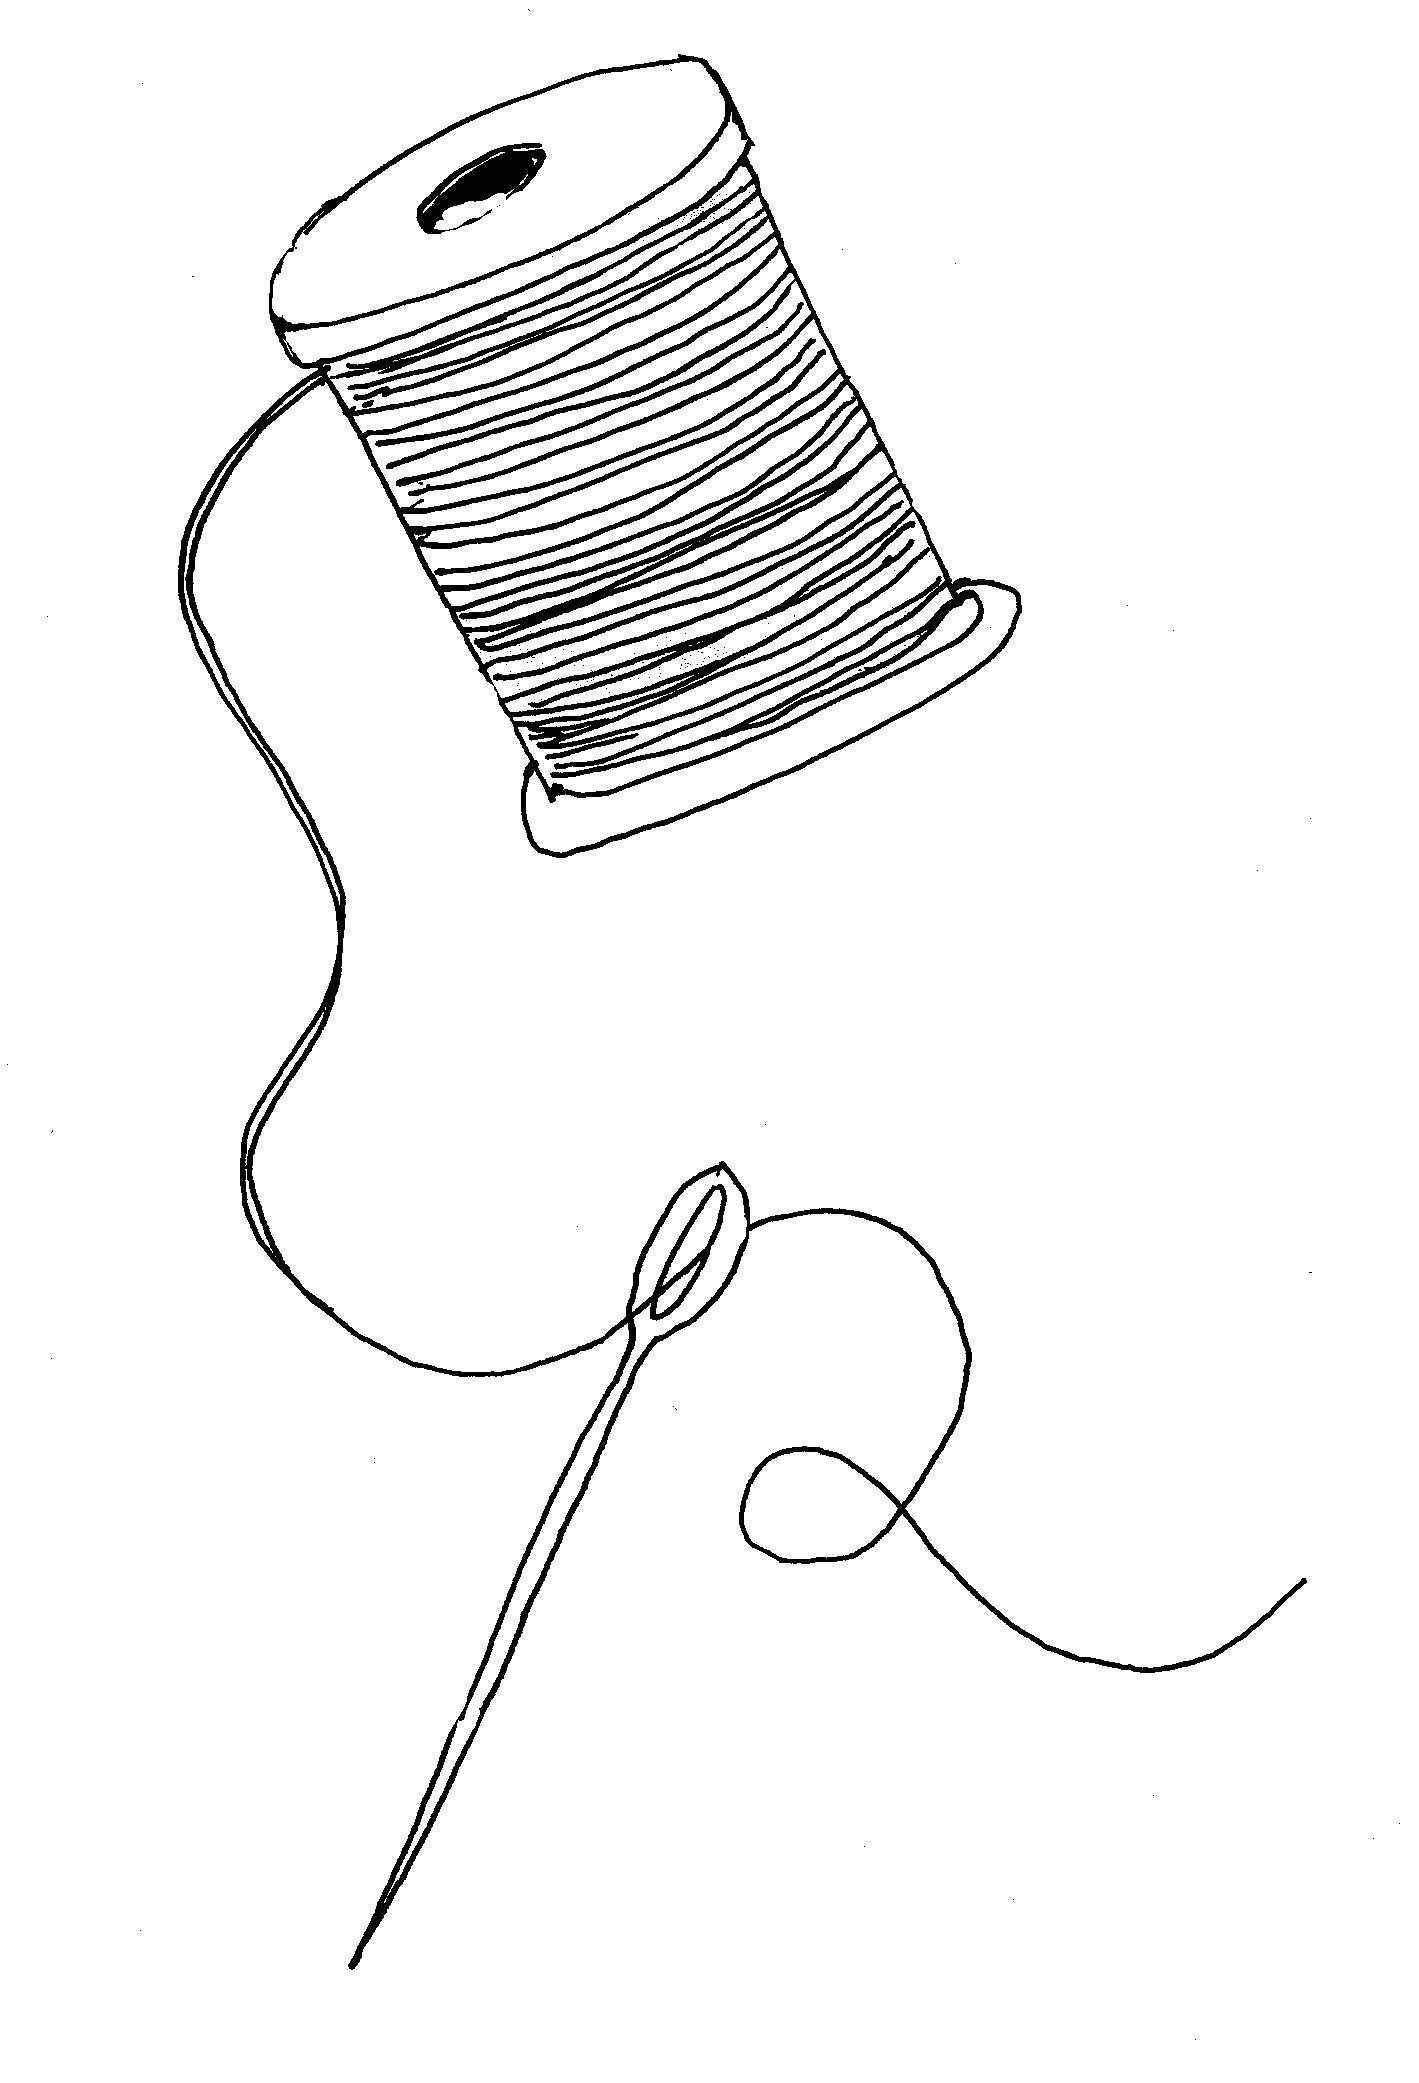 Cartoon Sewing Needle And Thread - Clipart library